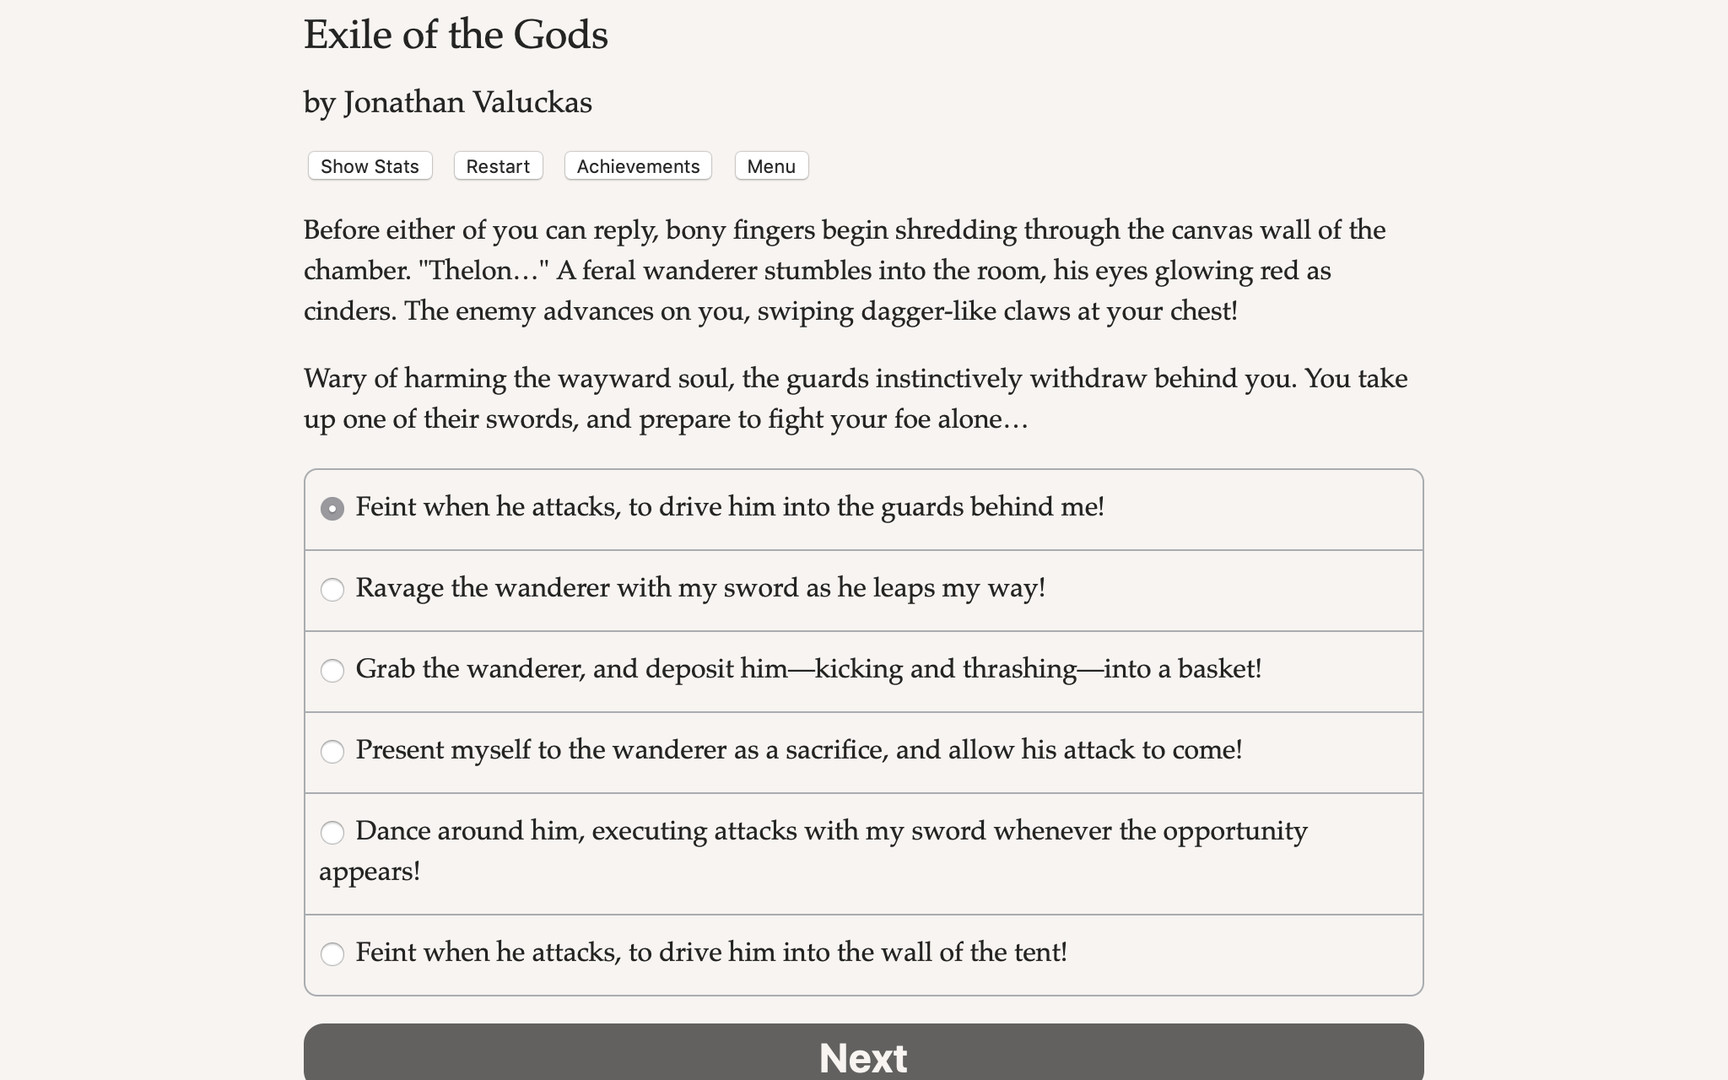 Exile of the Gods Free Download